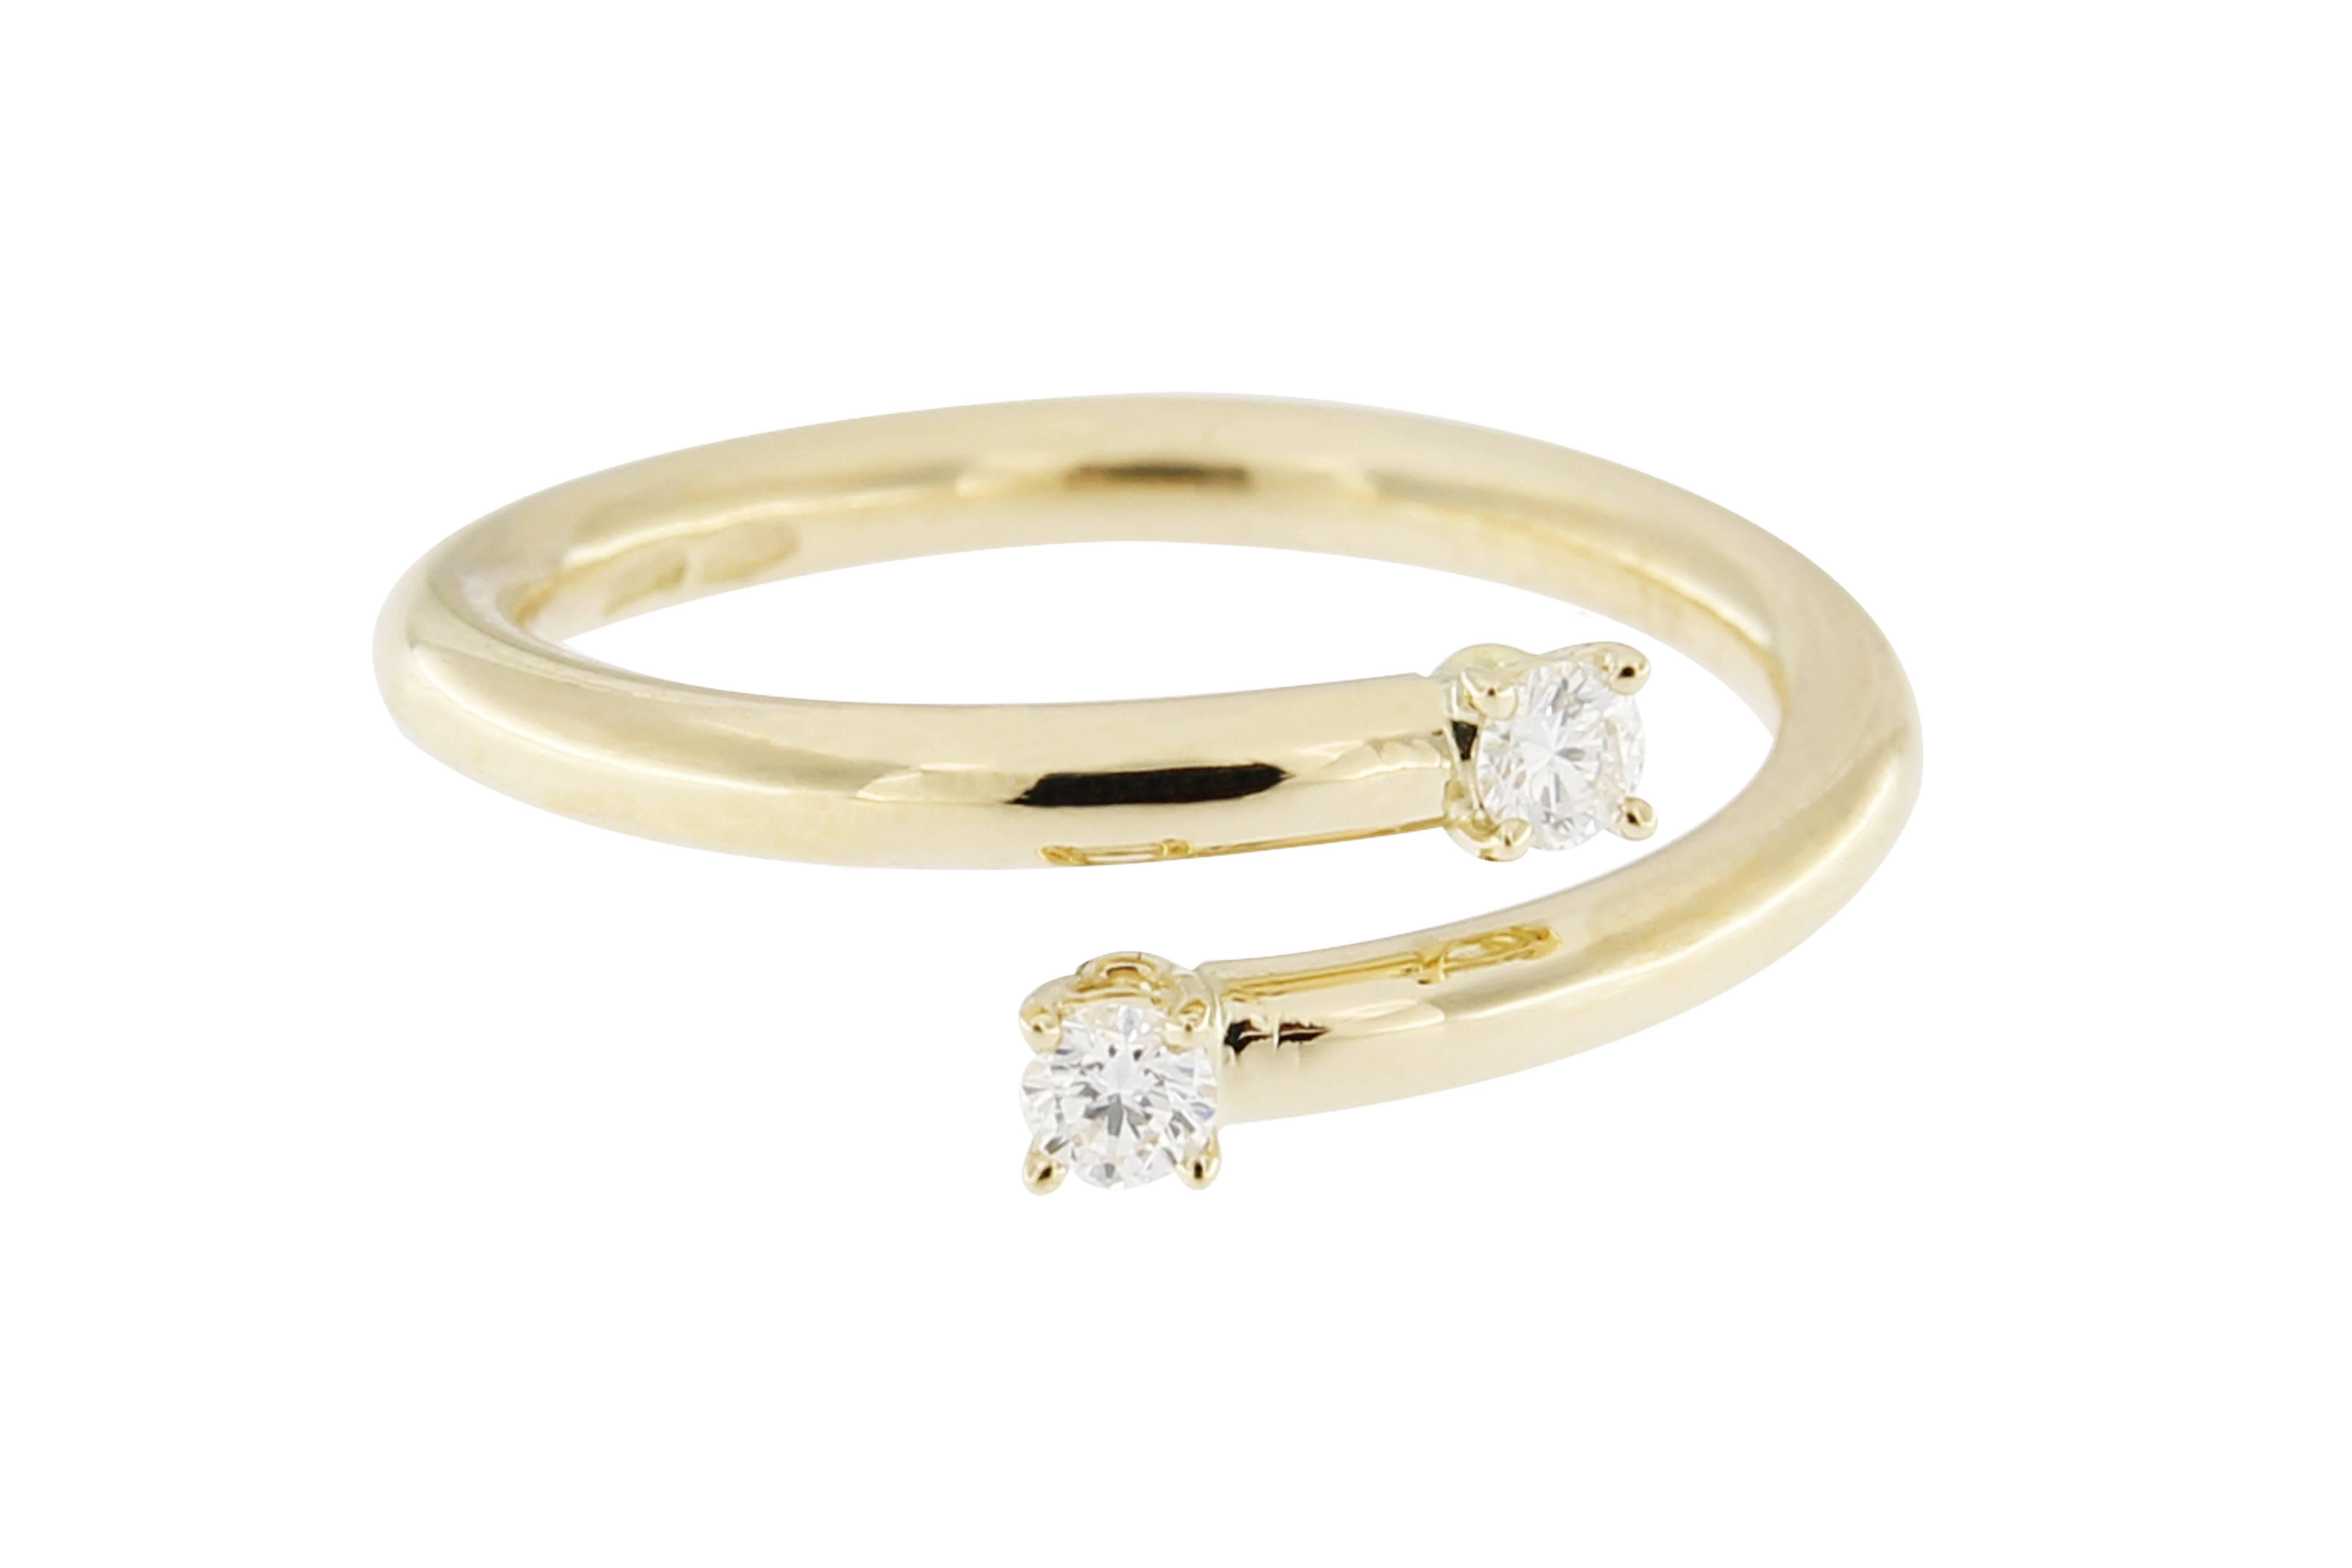 Jona design collection, hand crafted in Italy, 18 karat yellow gold crossover ring set with 0.14 carats of white diamonds, F color, VS 1 clarity. US size 6/ EU size 12.
Dimensions:
0.89 in H/ 0.87 in W/0.09 in Depth
22.7 mm H/22 mm W/ 2.3 mm